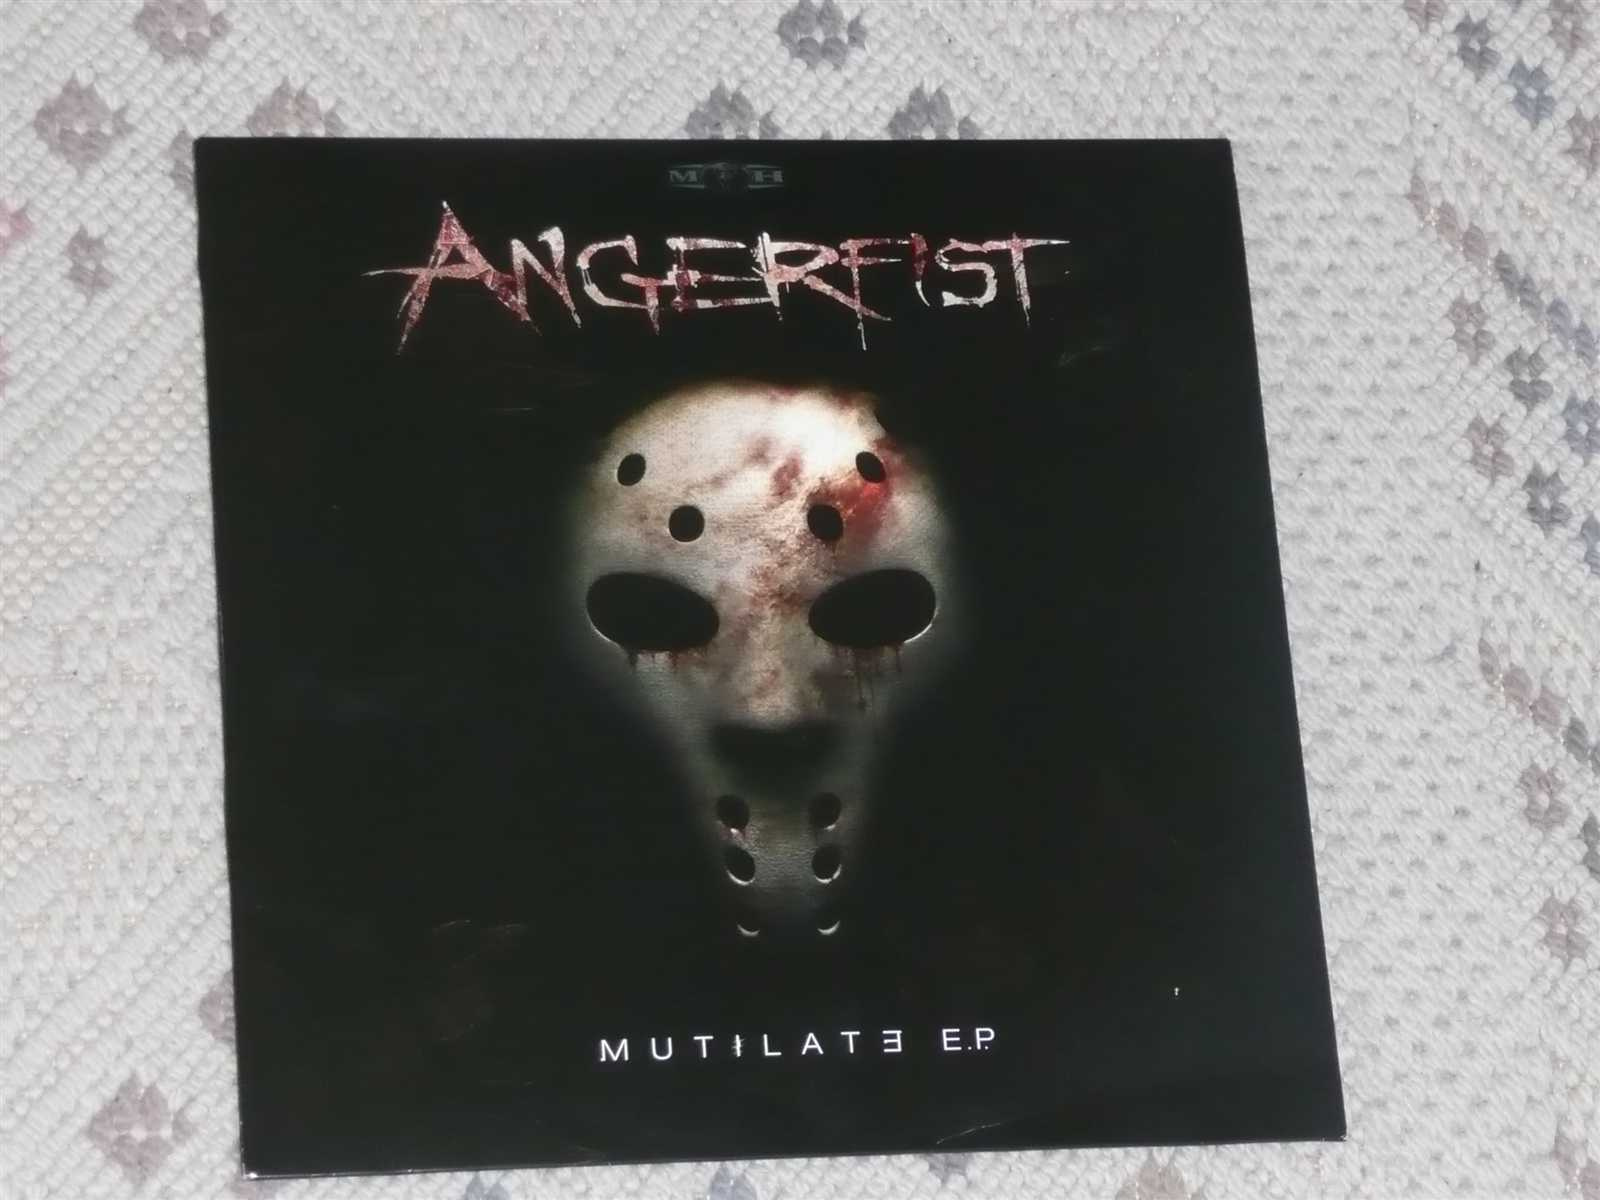 (MOH067) Angerfist - Mutilate (front)